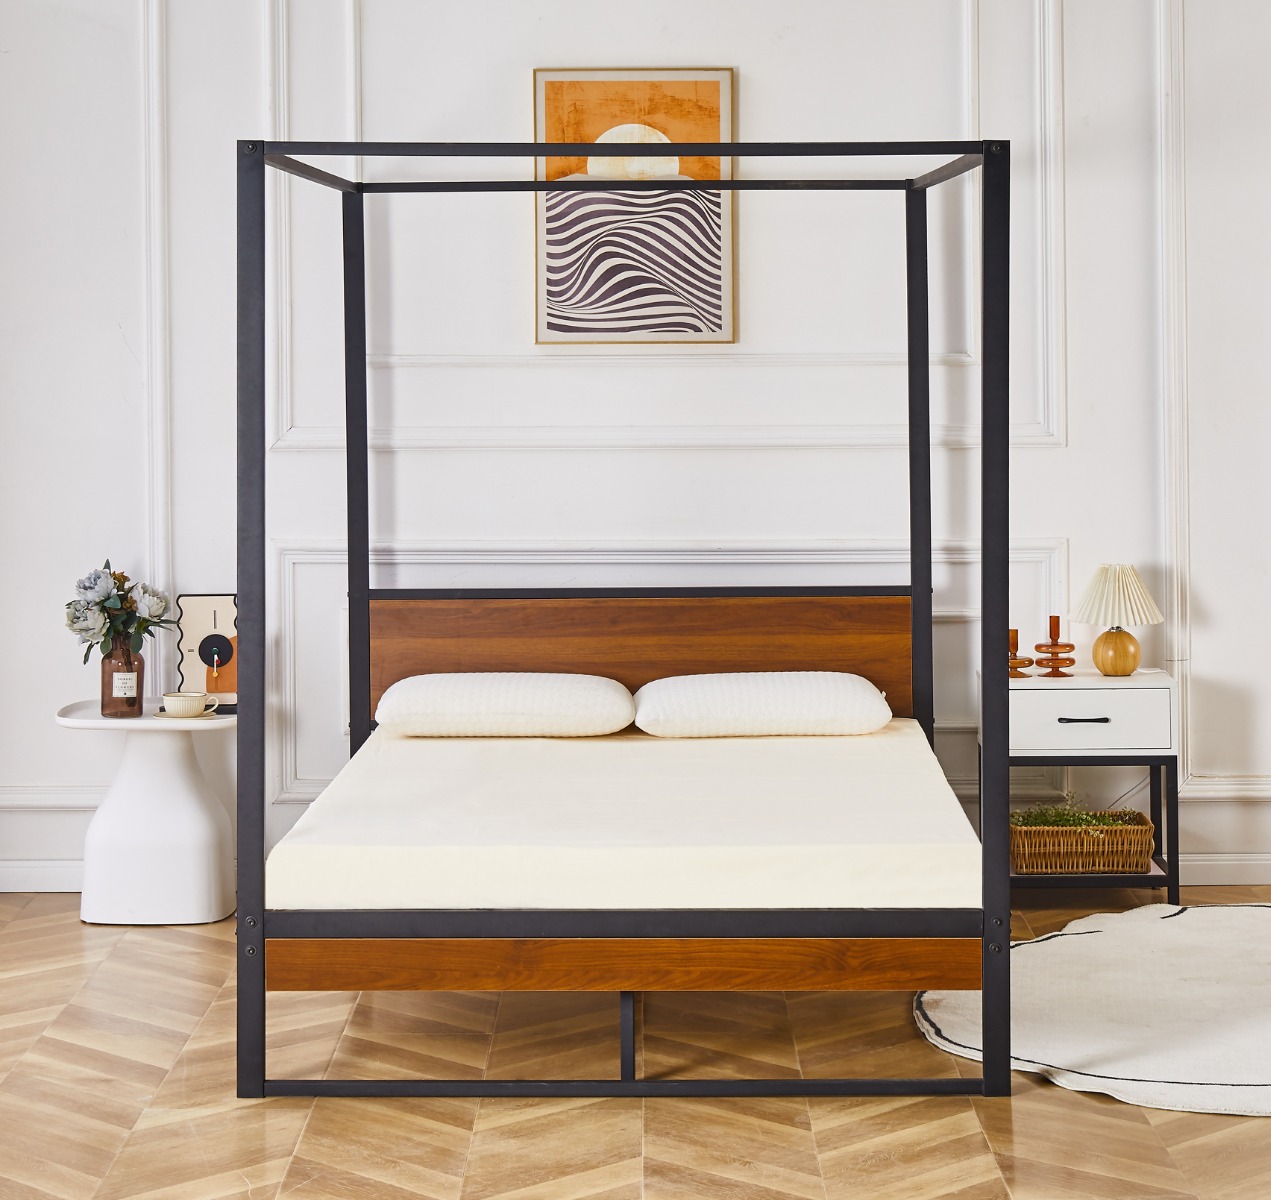 Flair Rockford Wooden Metal 4 Poster Bed Frame Double